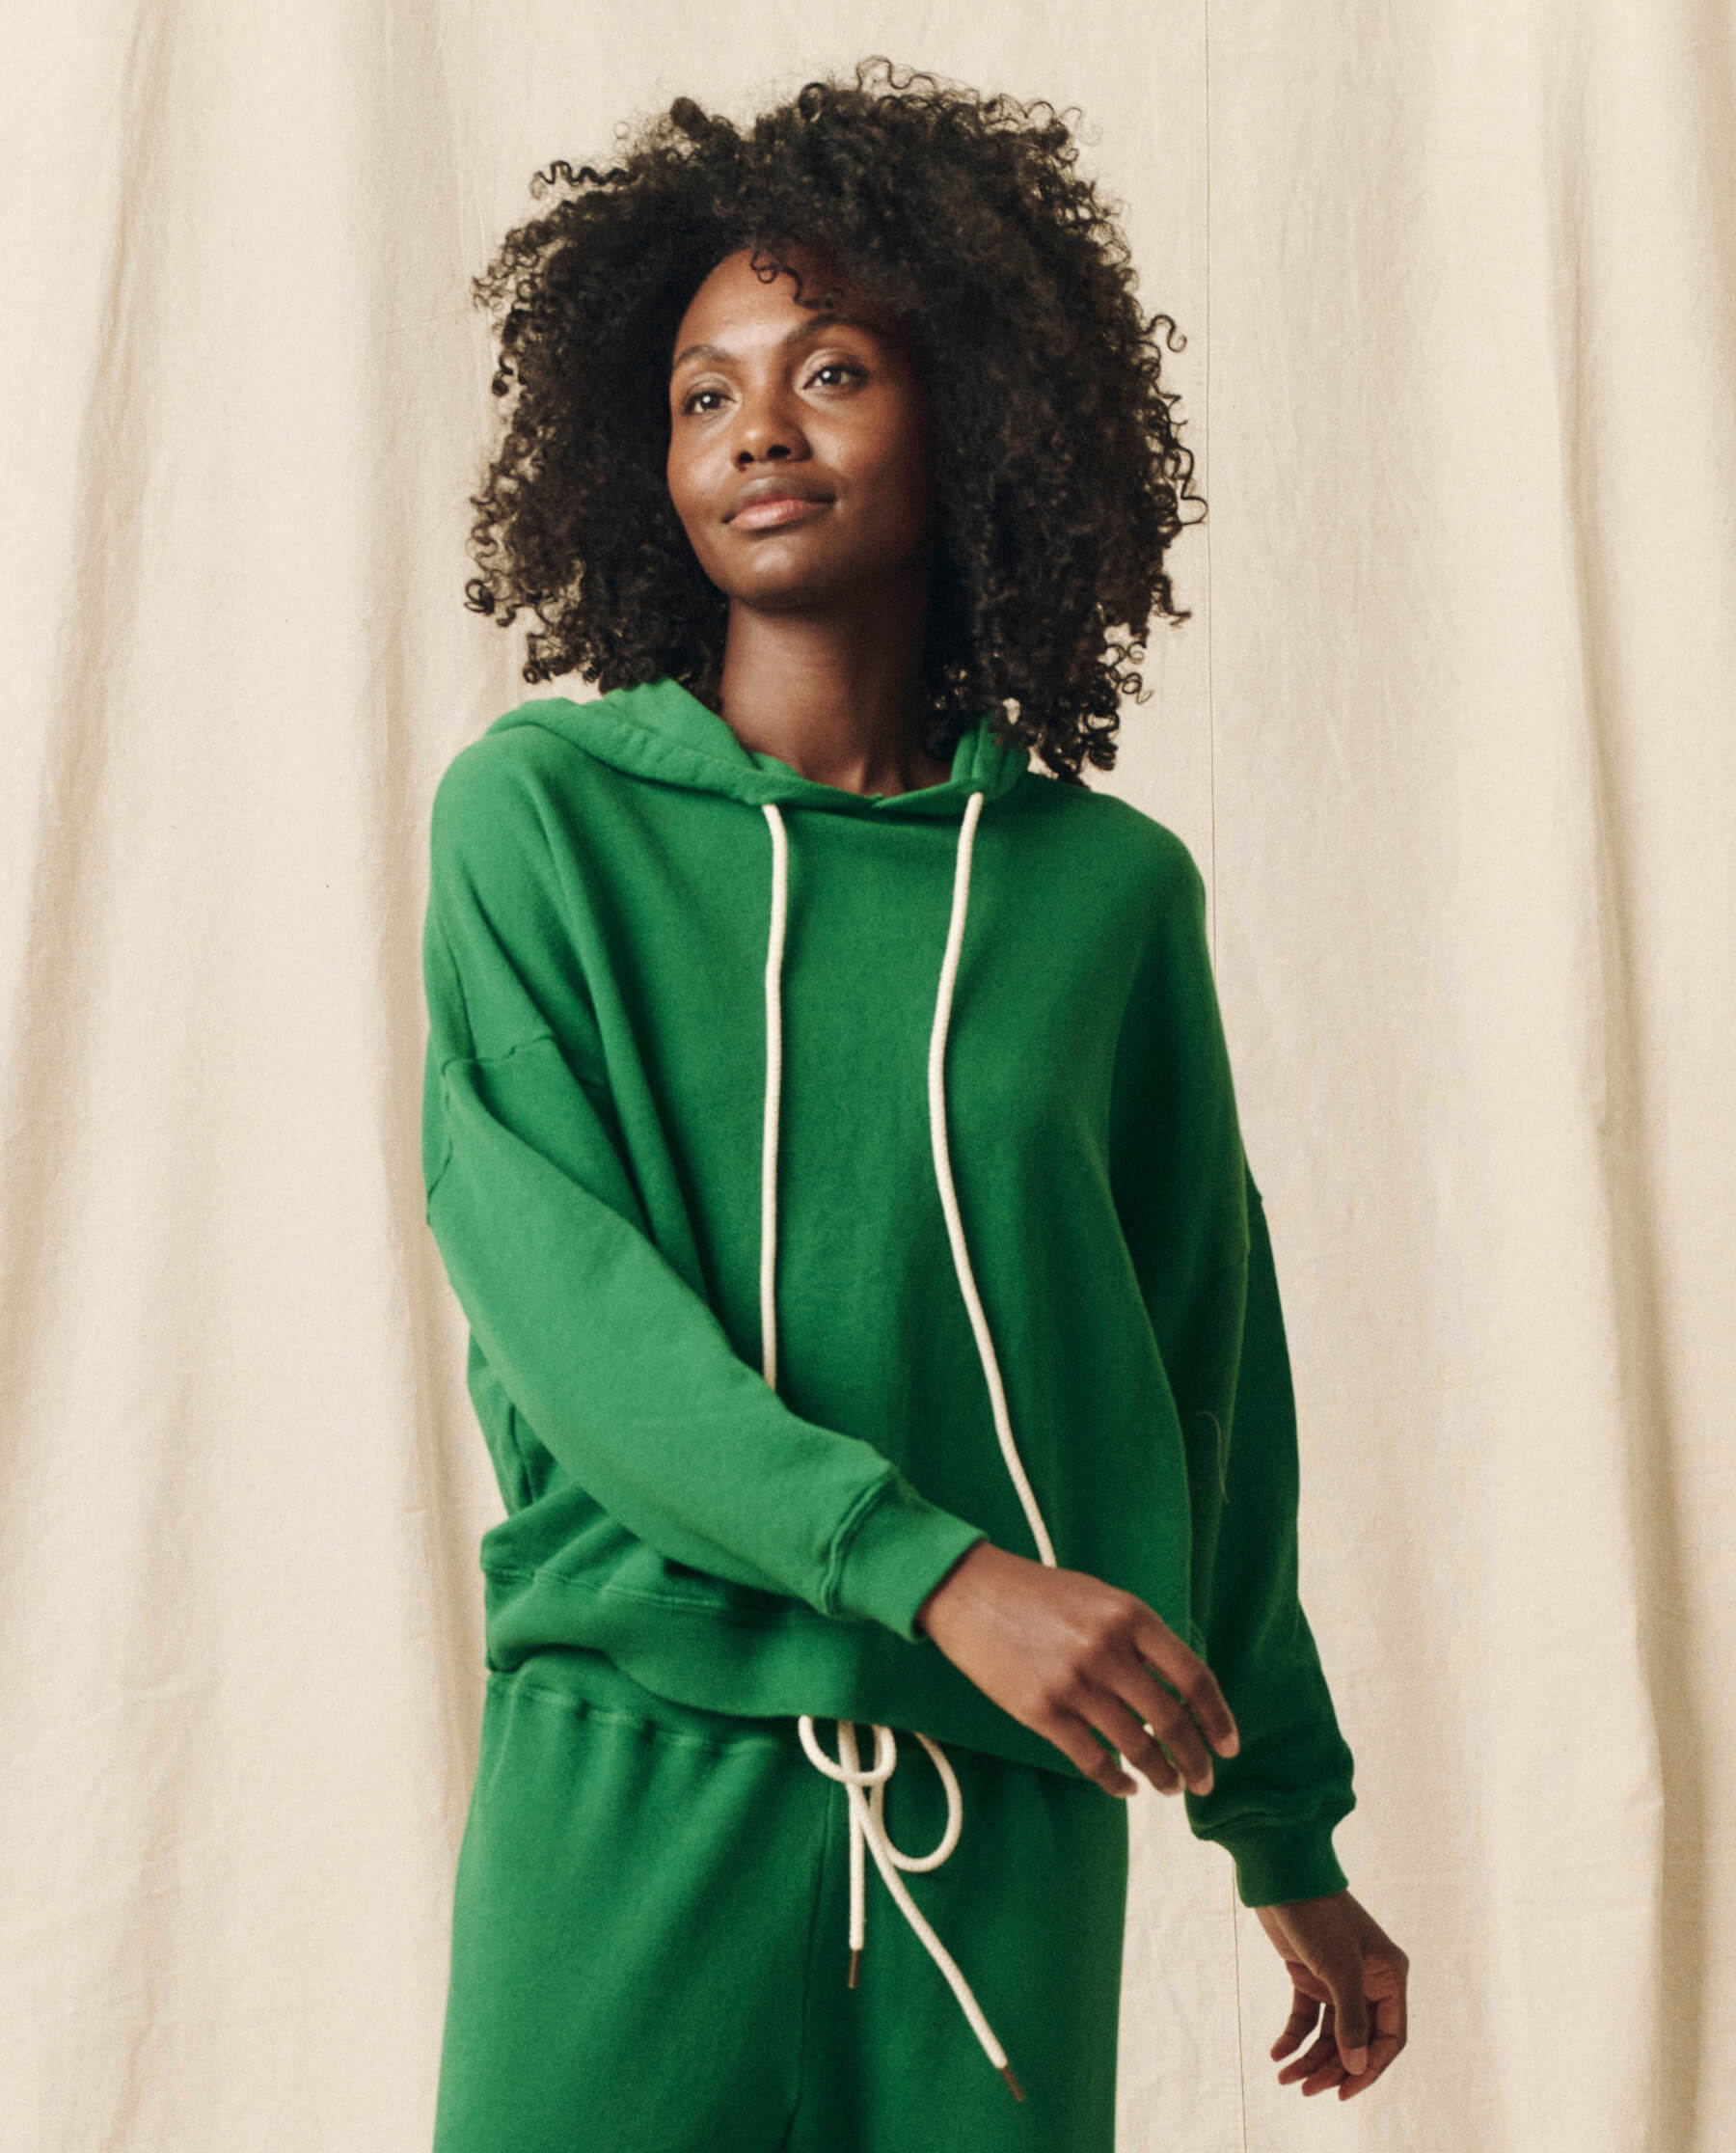 The Teammate Hoodie. Solid -- Holly Leaf SWEATSHIRTS THE GREAT. HOL 23 KNITS